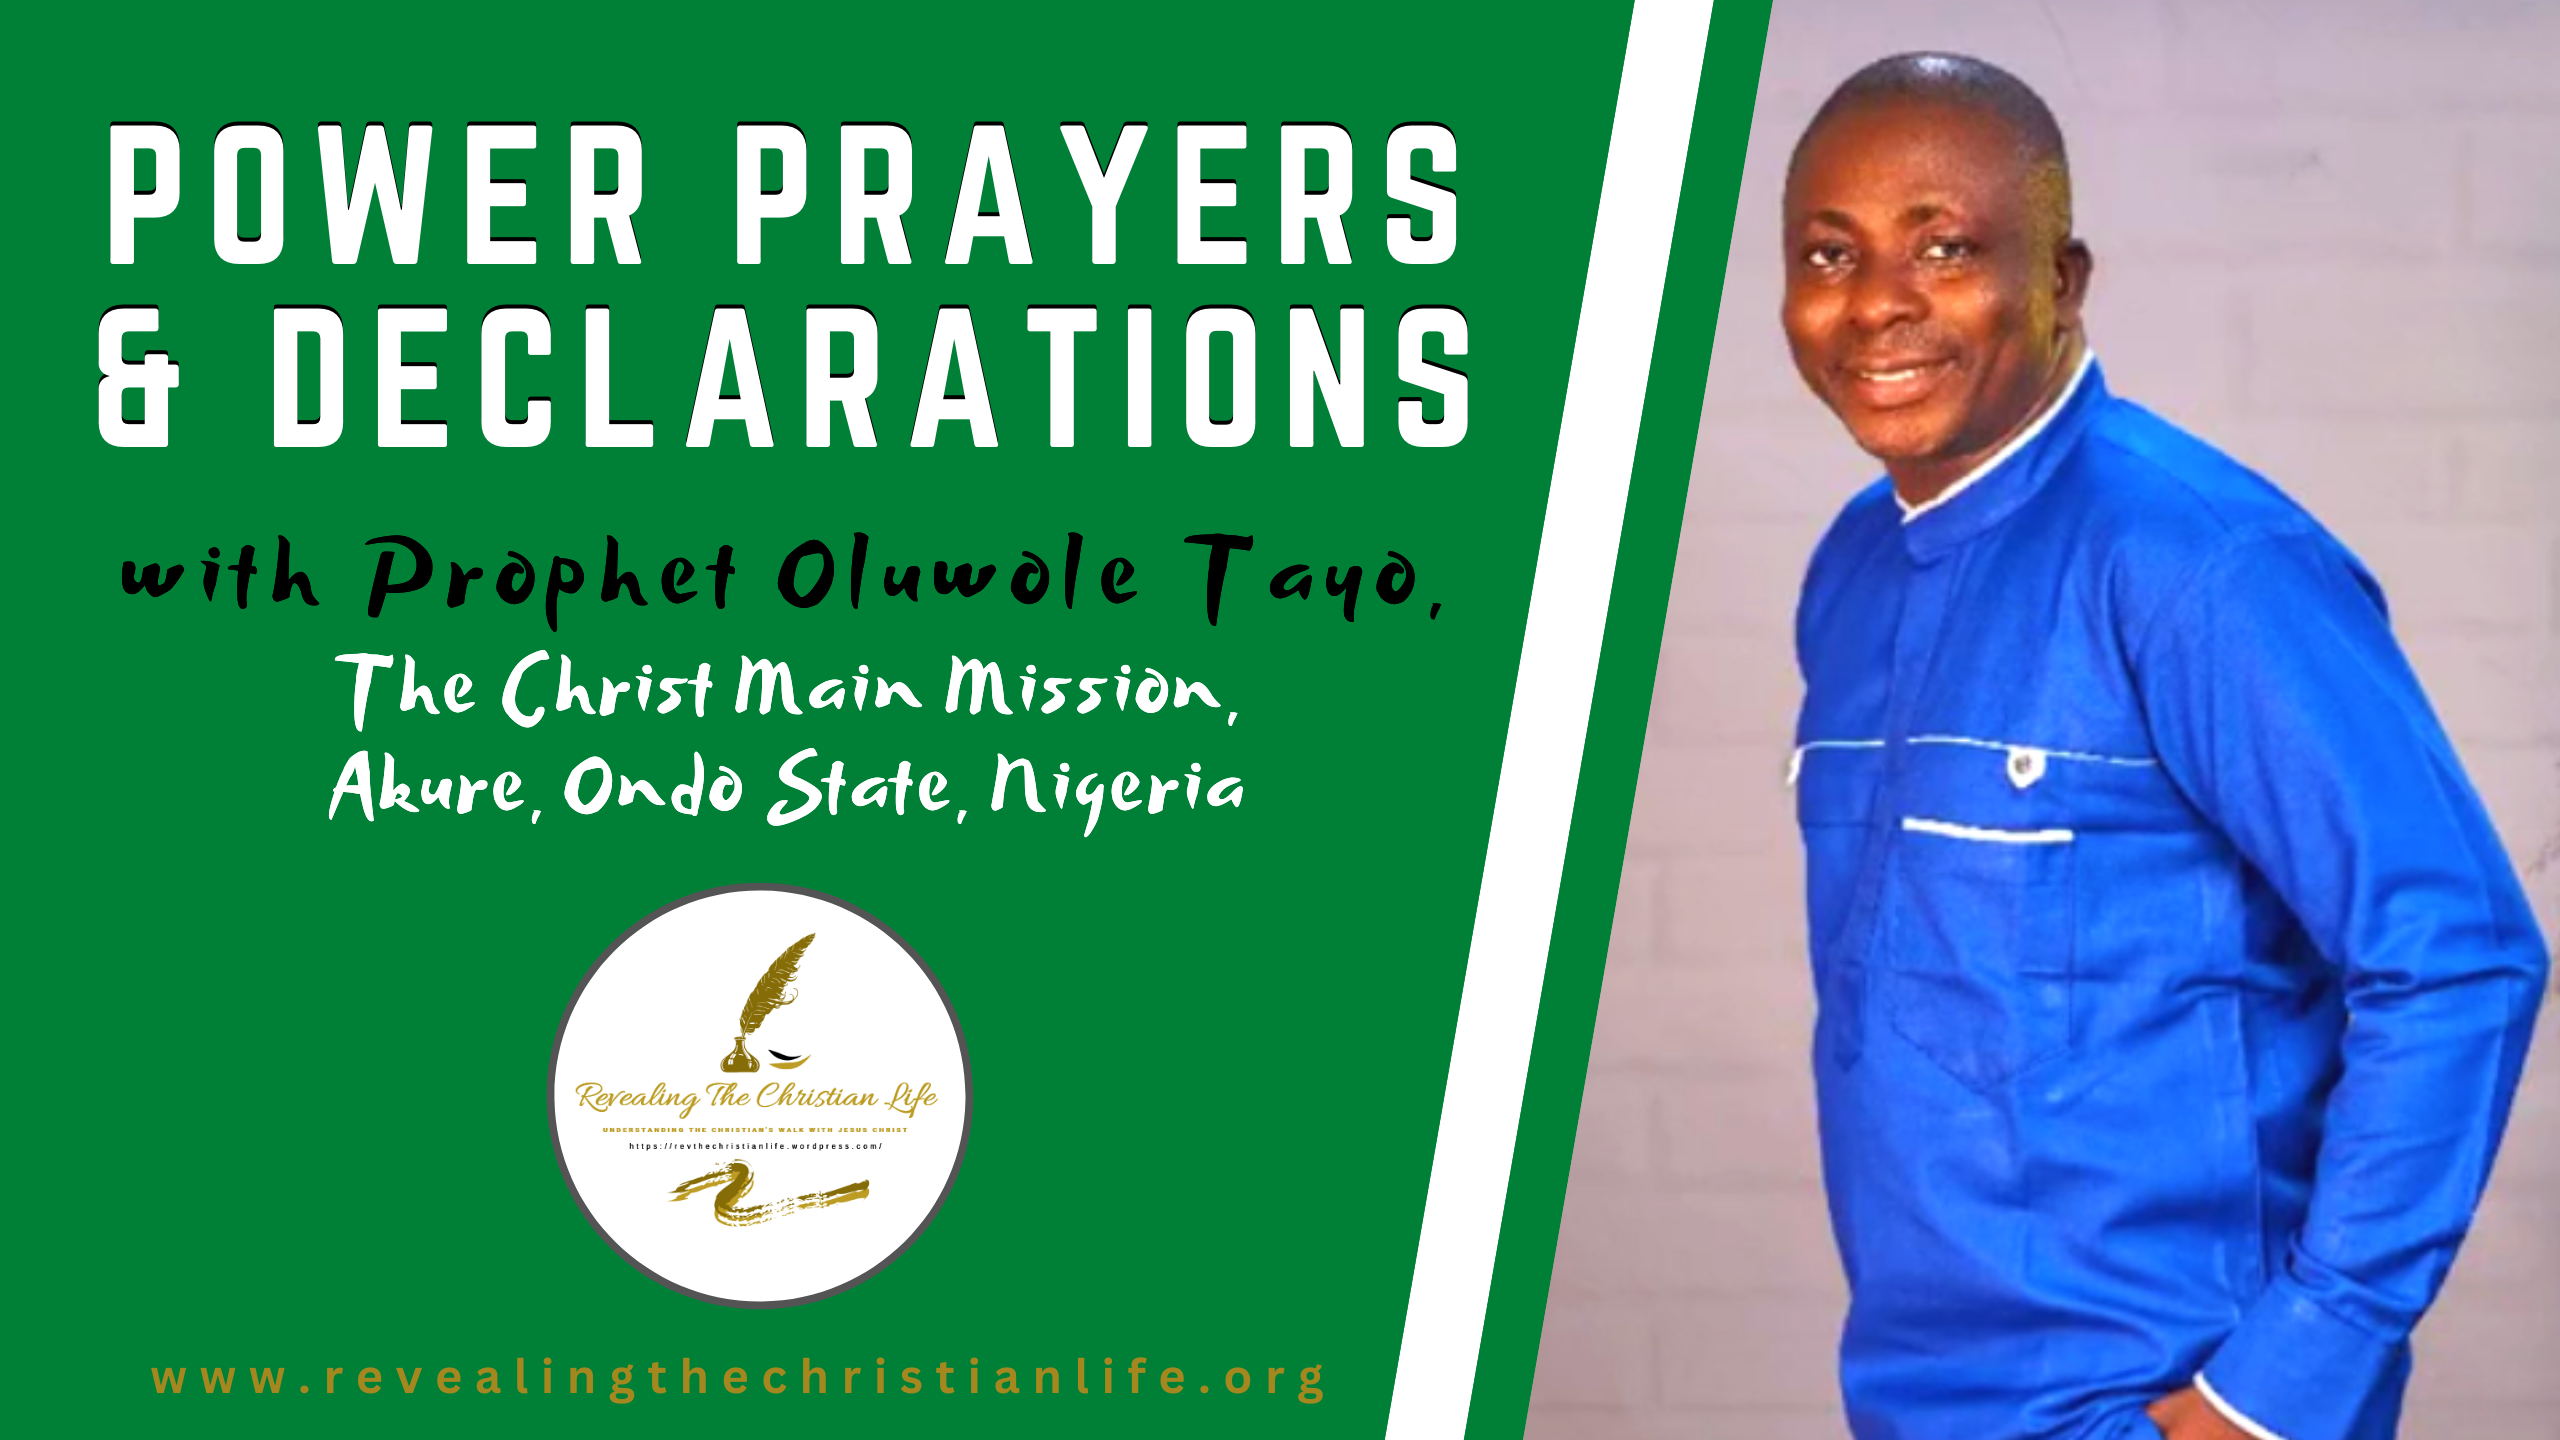 Power Prayers & Declarations from One Year Anniversary of Prayer with Prophet Oluwole Tayo